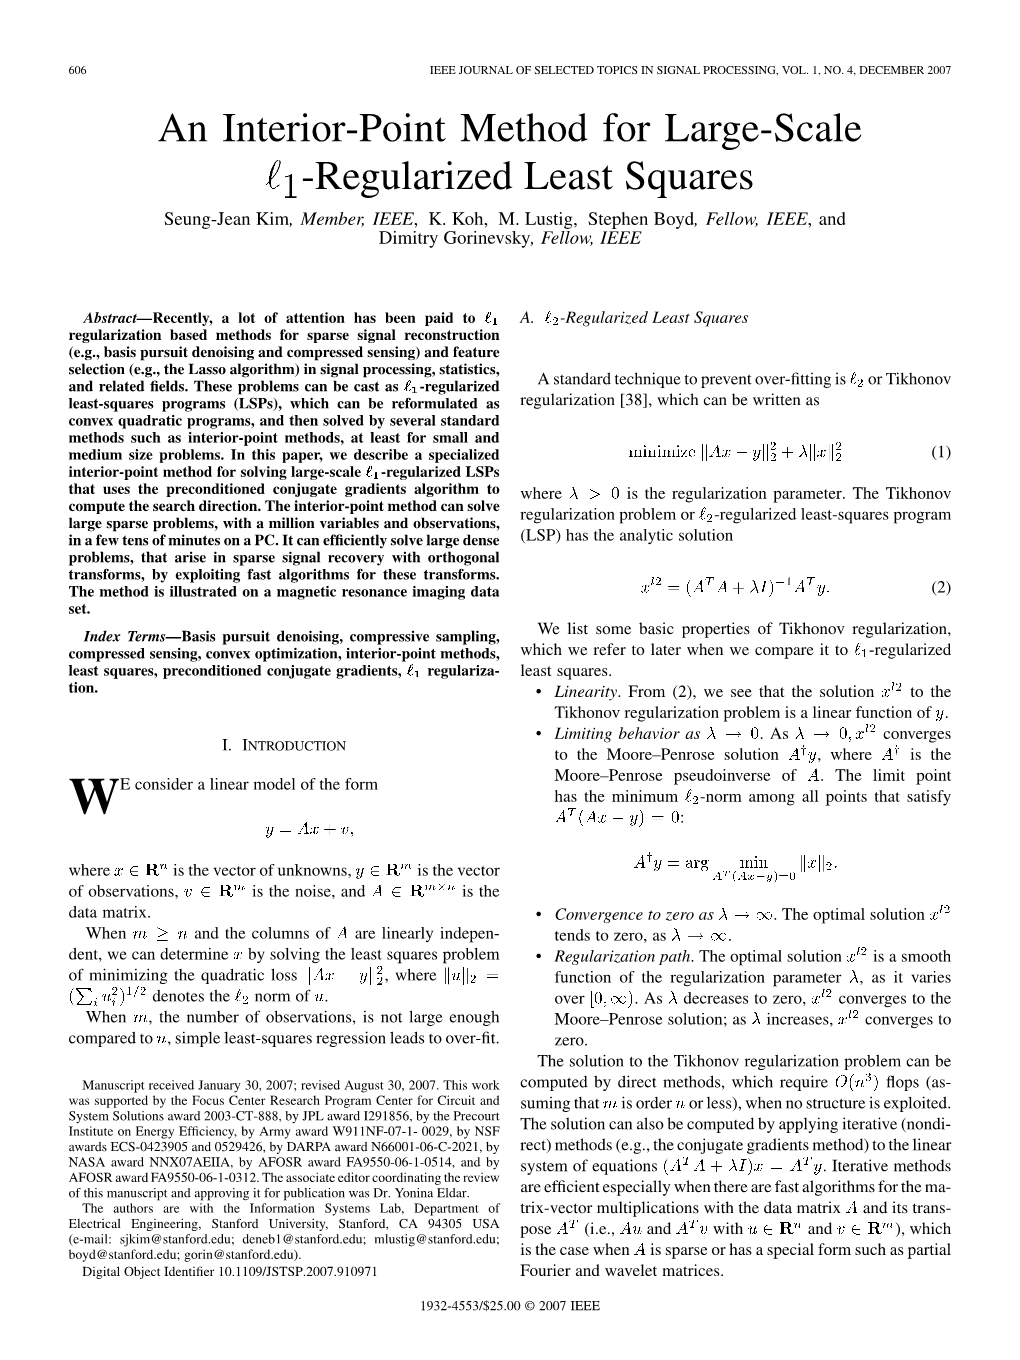 An Interior-Point Method for Large-Scale -Regularized Least Squares 607